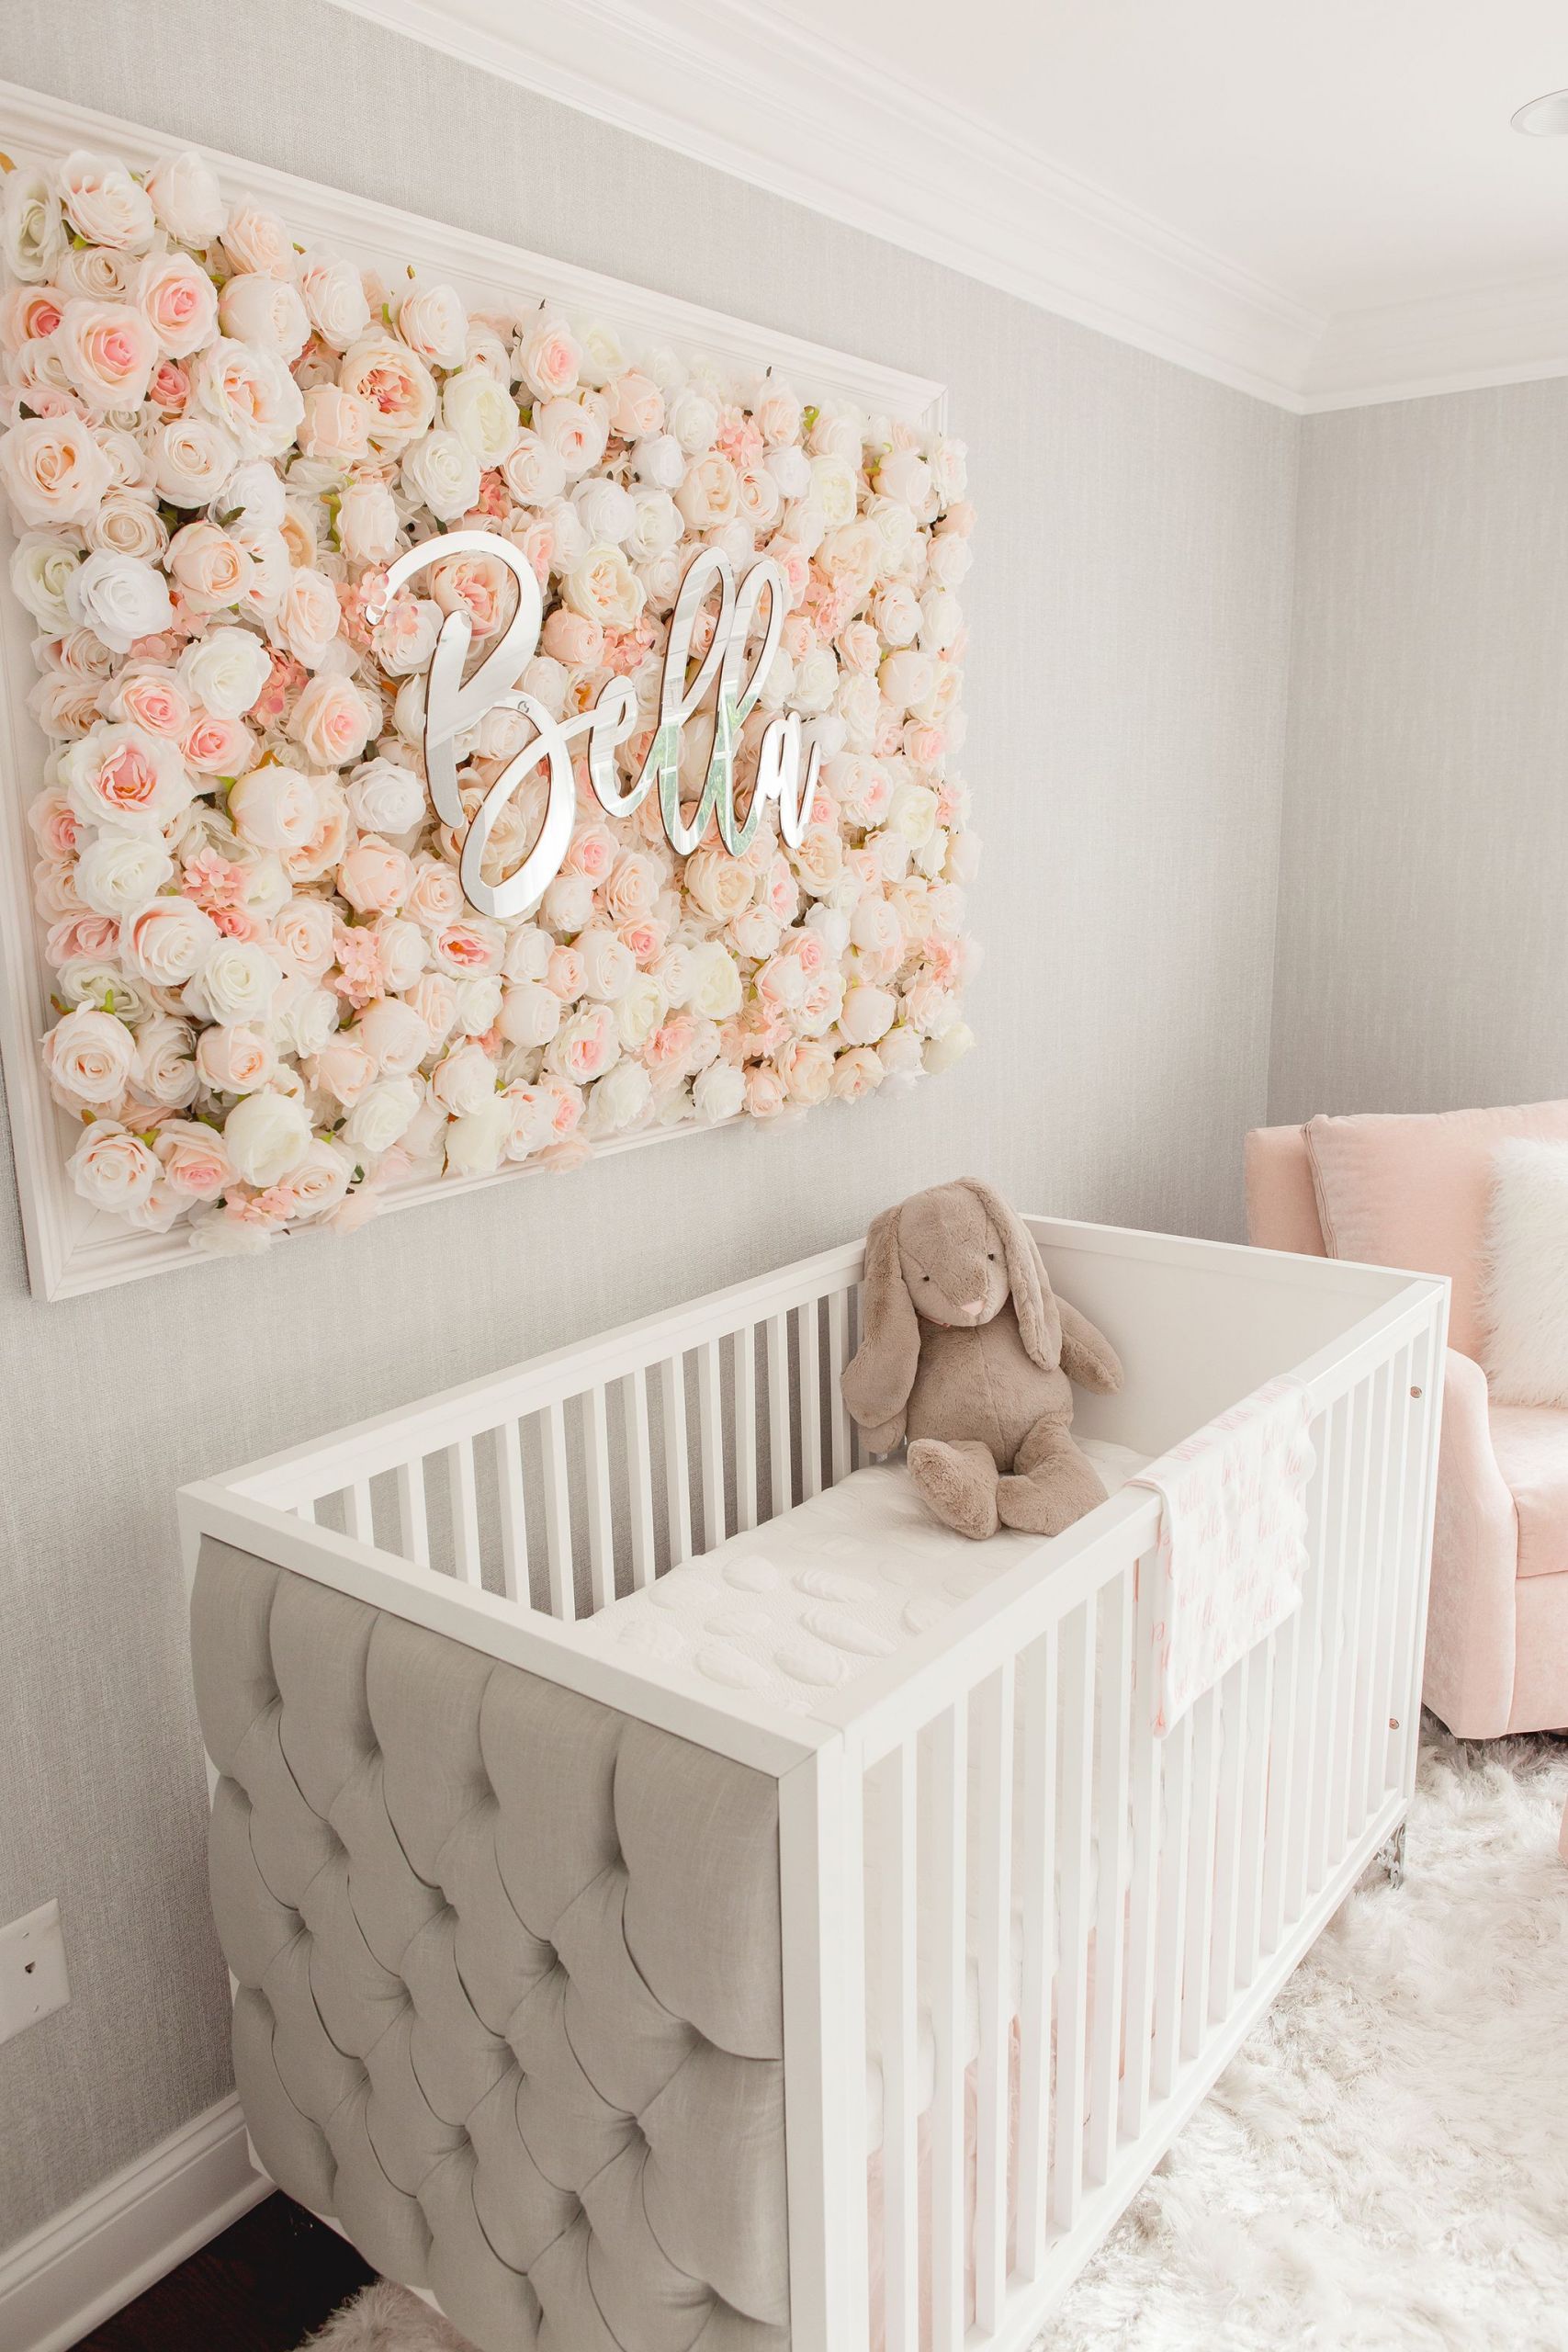 Baby Girl Wall Decor Ideas
 Guess Which Celebrity Nursery Inspired this Gorgeous Space